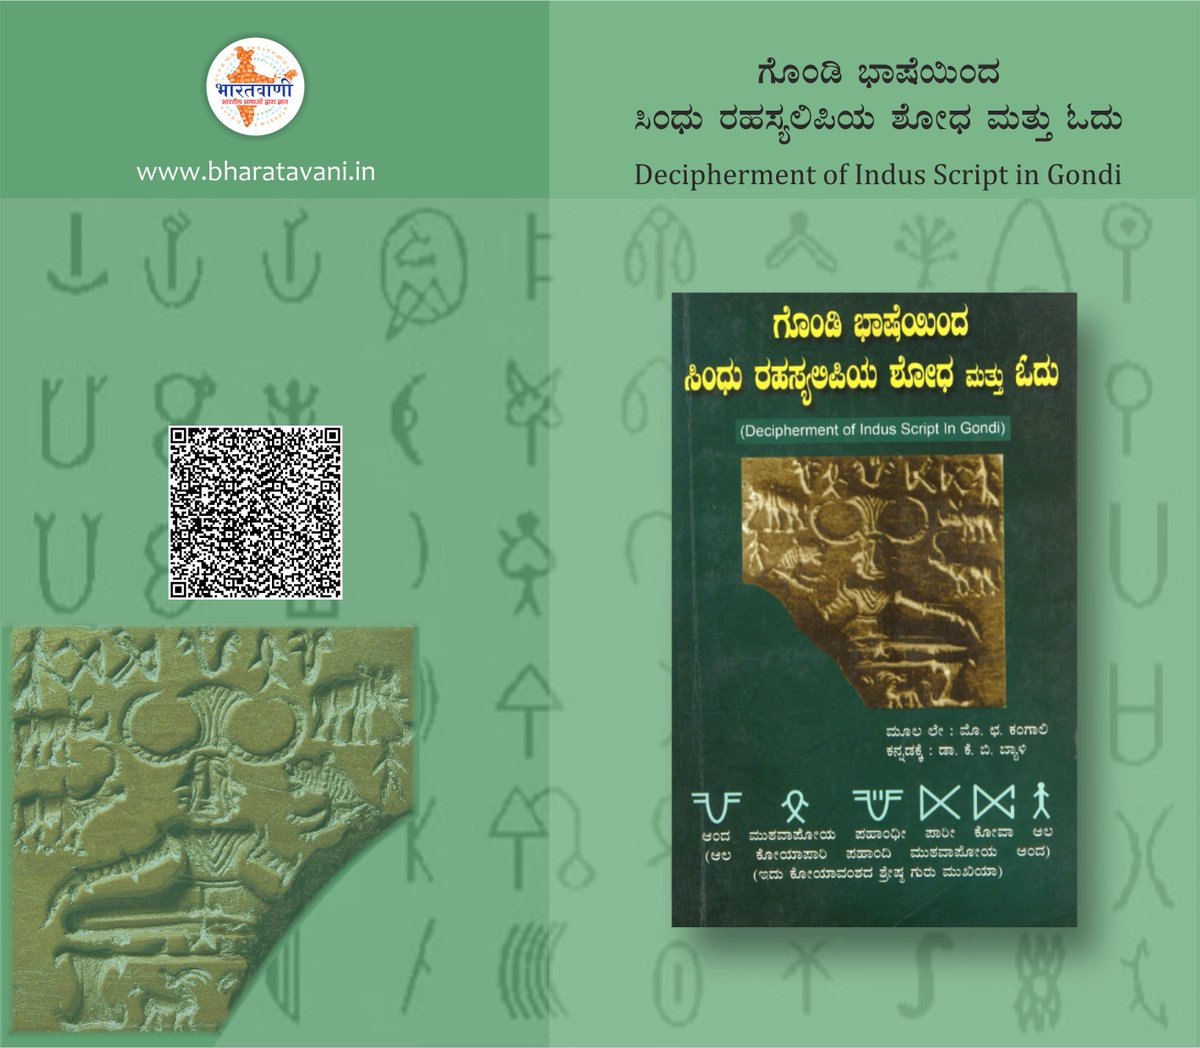 Unlock the mysteries of ancient civilizations by exploring the enigmatic script of the Indus Valley Civilization, decoded through the lens of Gondi language. Best part? You can read it for FREE @bharatavani.in! Don't miss out on this incredible journey through time & language!